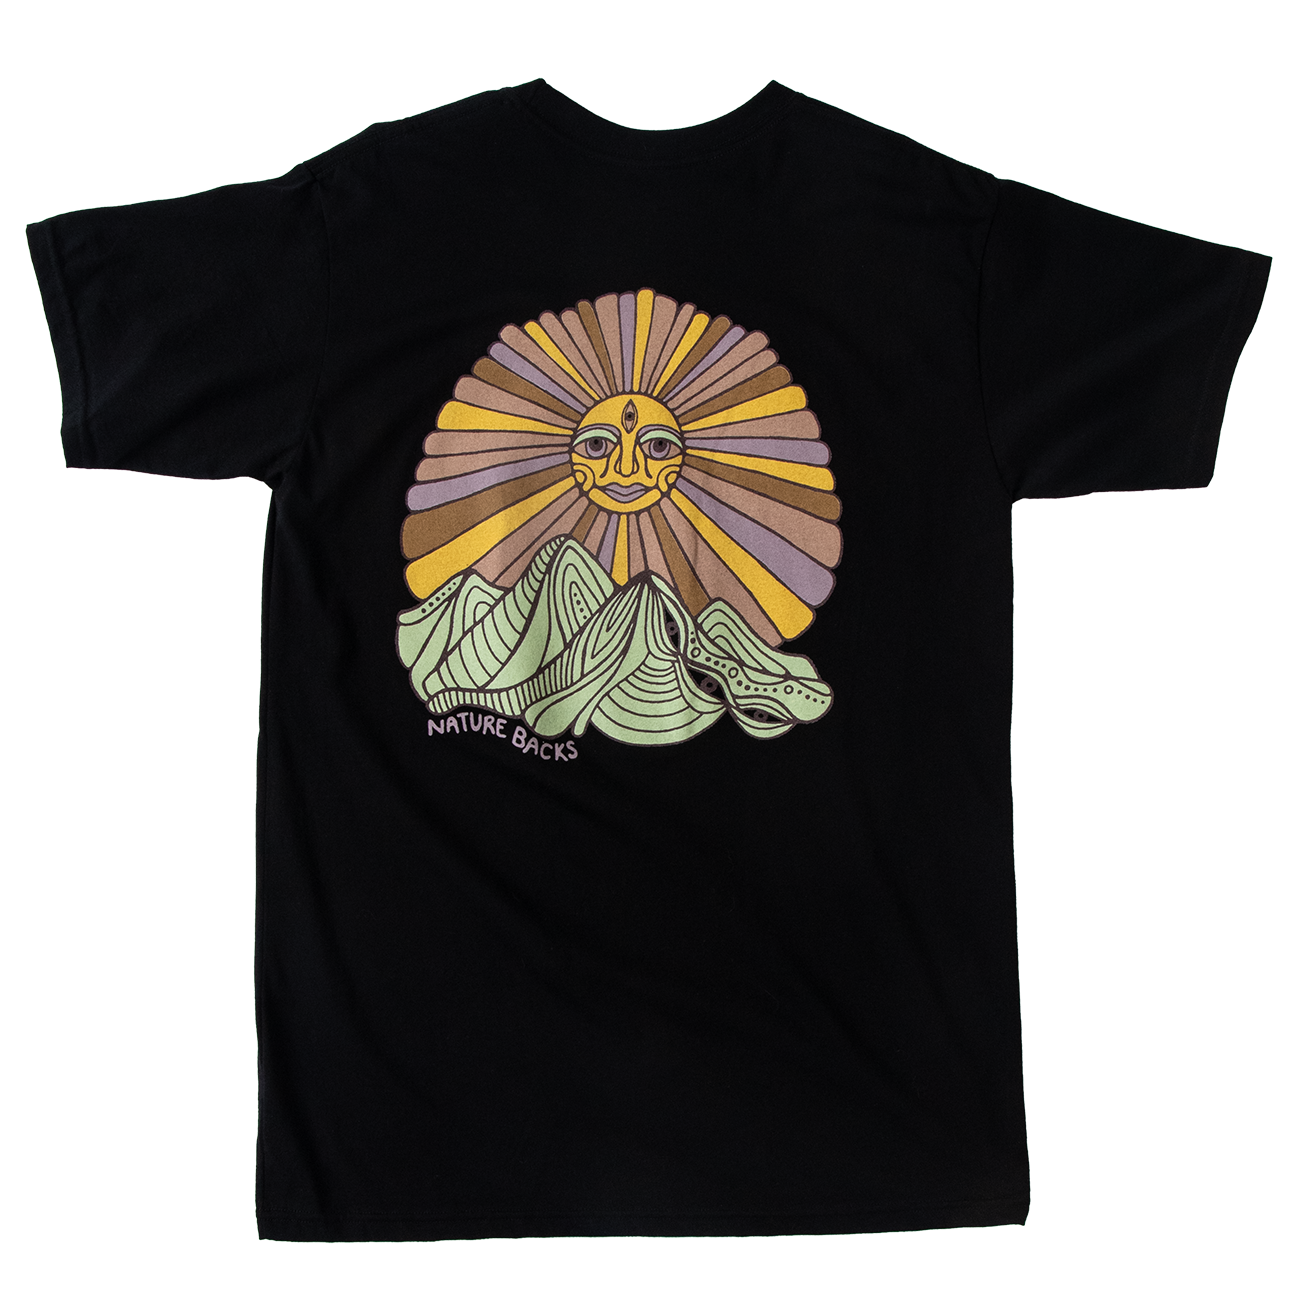 Nature Backs Limited Edition Short Sleeve 100% Organic Cotton T-Shirt | Limited Awaken Black Short Sleeve made with Eco-Friendly Fibers Sustainably made in the USA 